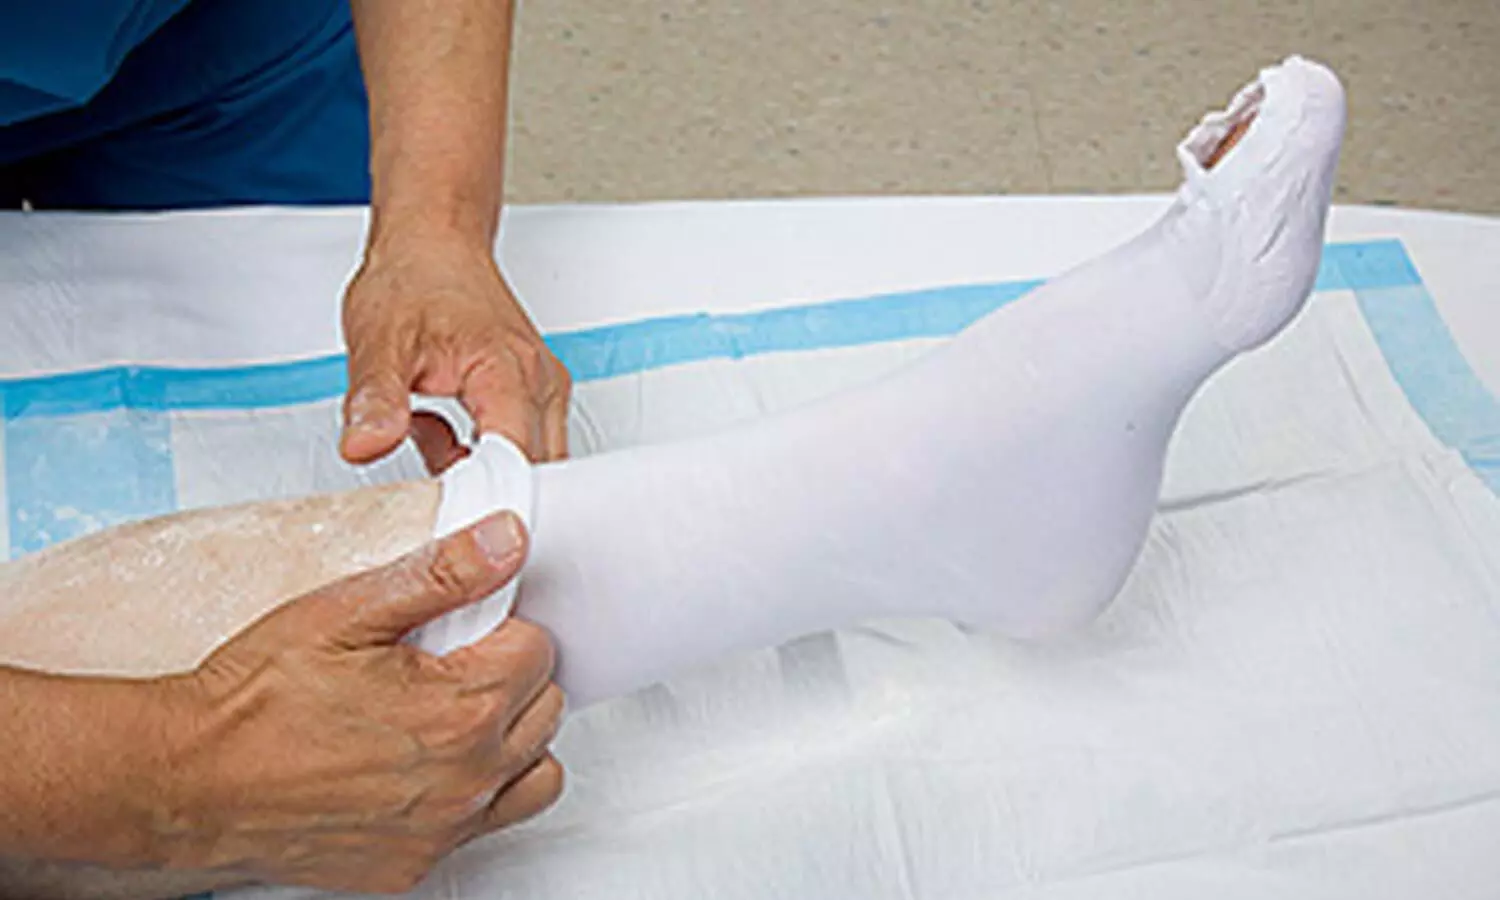 Compression therapy reduces recurrent leg cellulitis, finds NEJM study